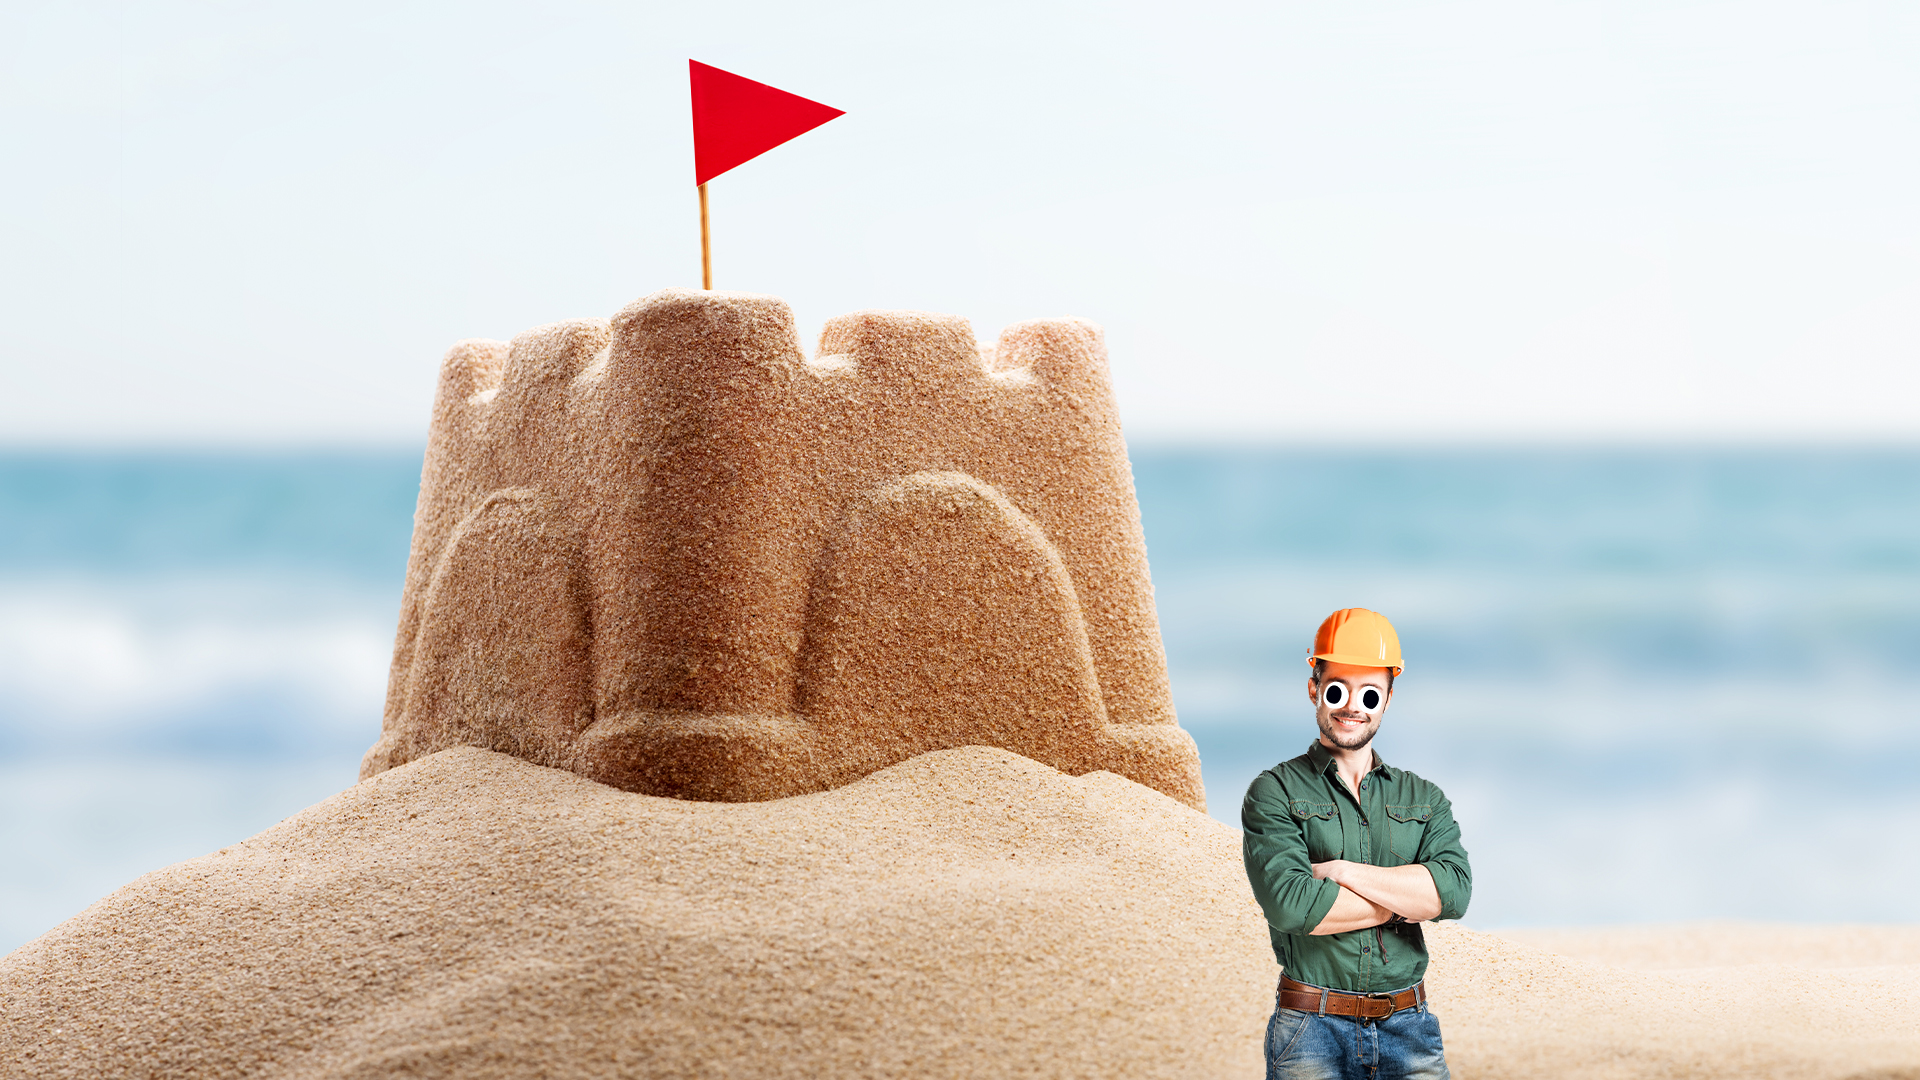 A big sandcastle and construction worker